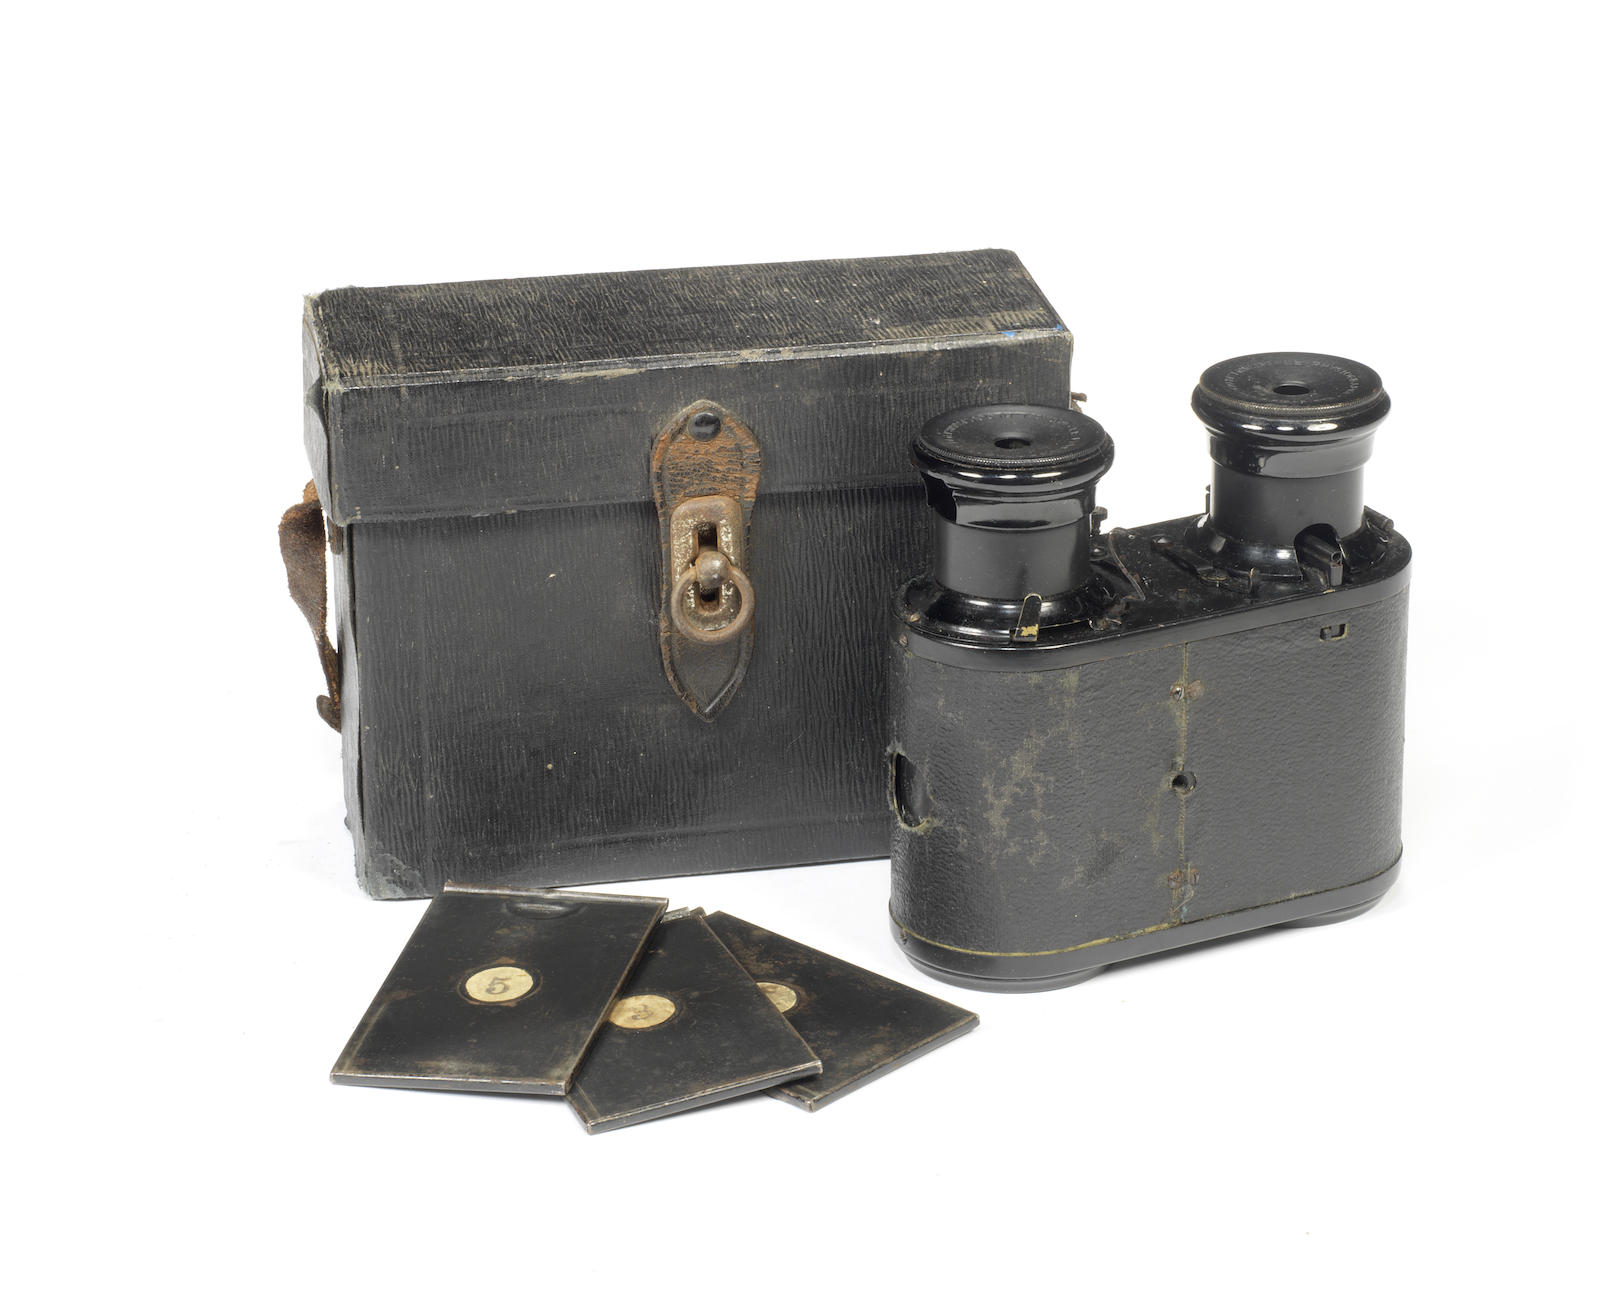 14 Exquisite Clandestine Cameras From The Golden Age Of Espionage